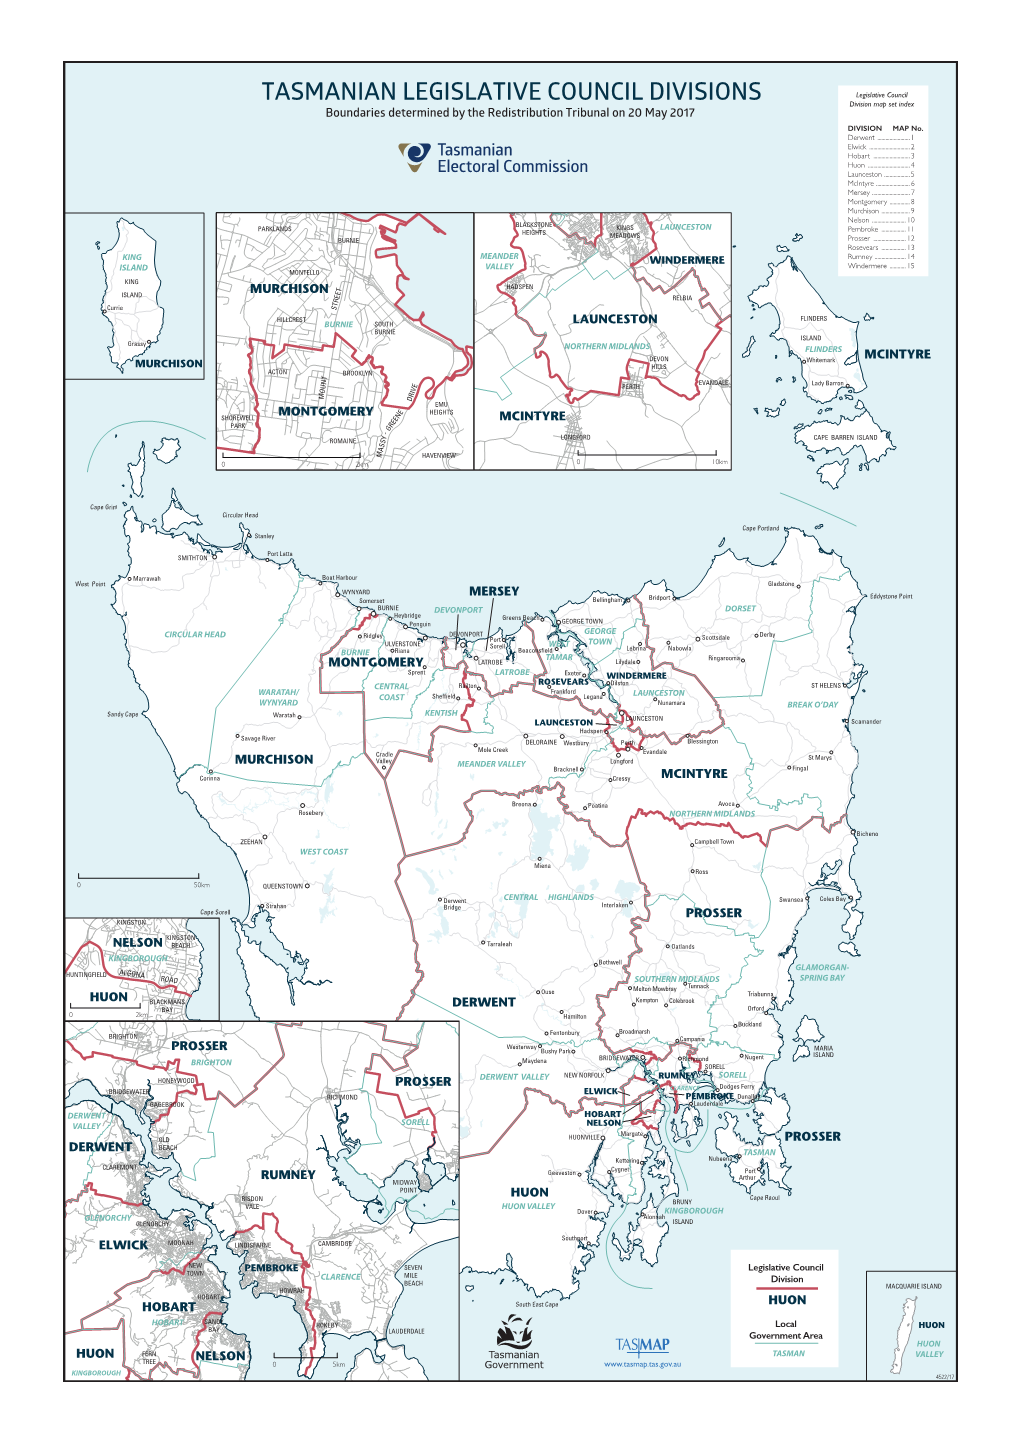 TASMANIAN LEGISLATIVE COUNCIL DIVISIONS Division Map Set Index Boundaries Determined by the Redistribution Tribunal on 20 May 2017 DIVISION MAP No